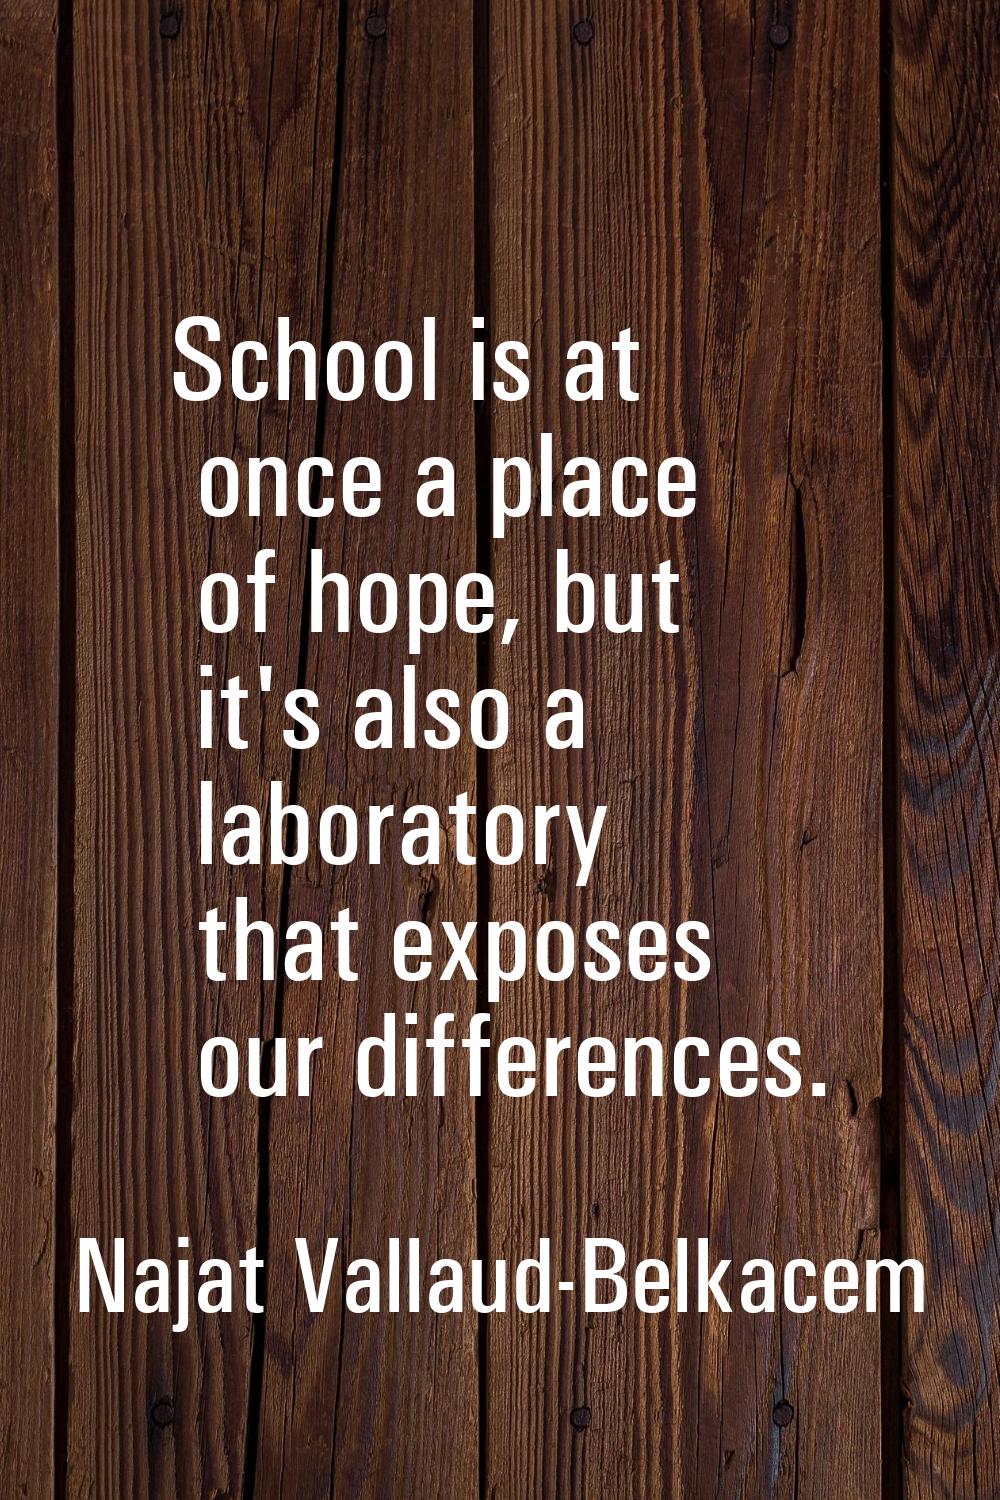 School is at once a place of hope, but it's also a laboratory that exposes our differences.